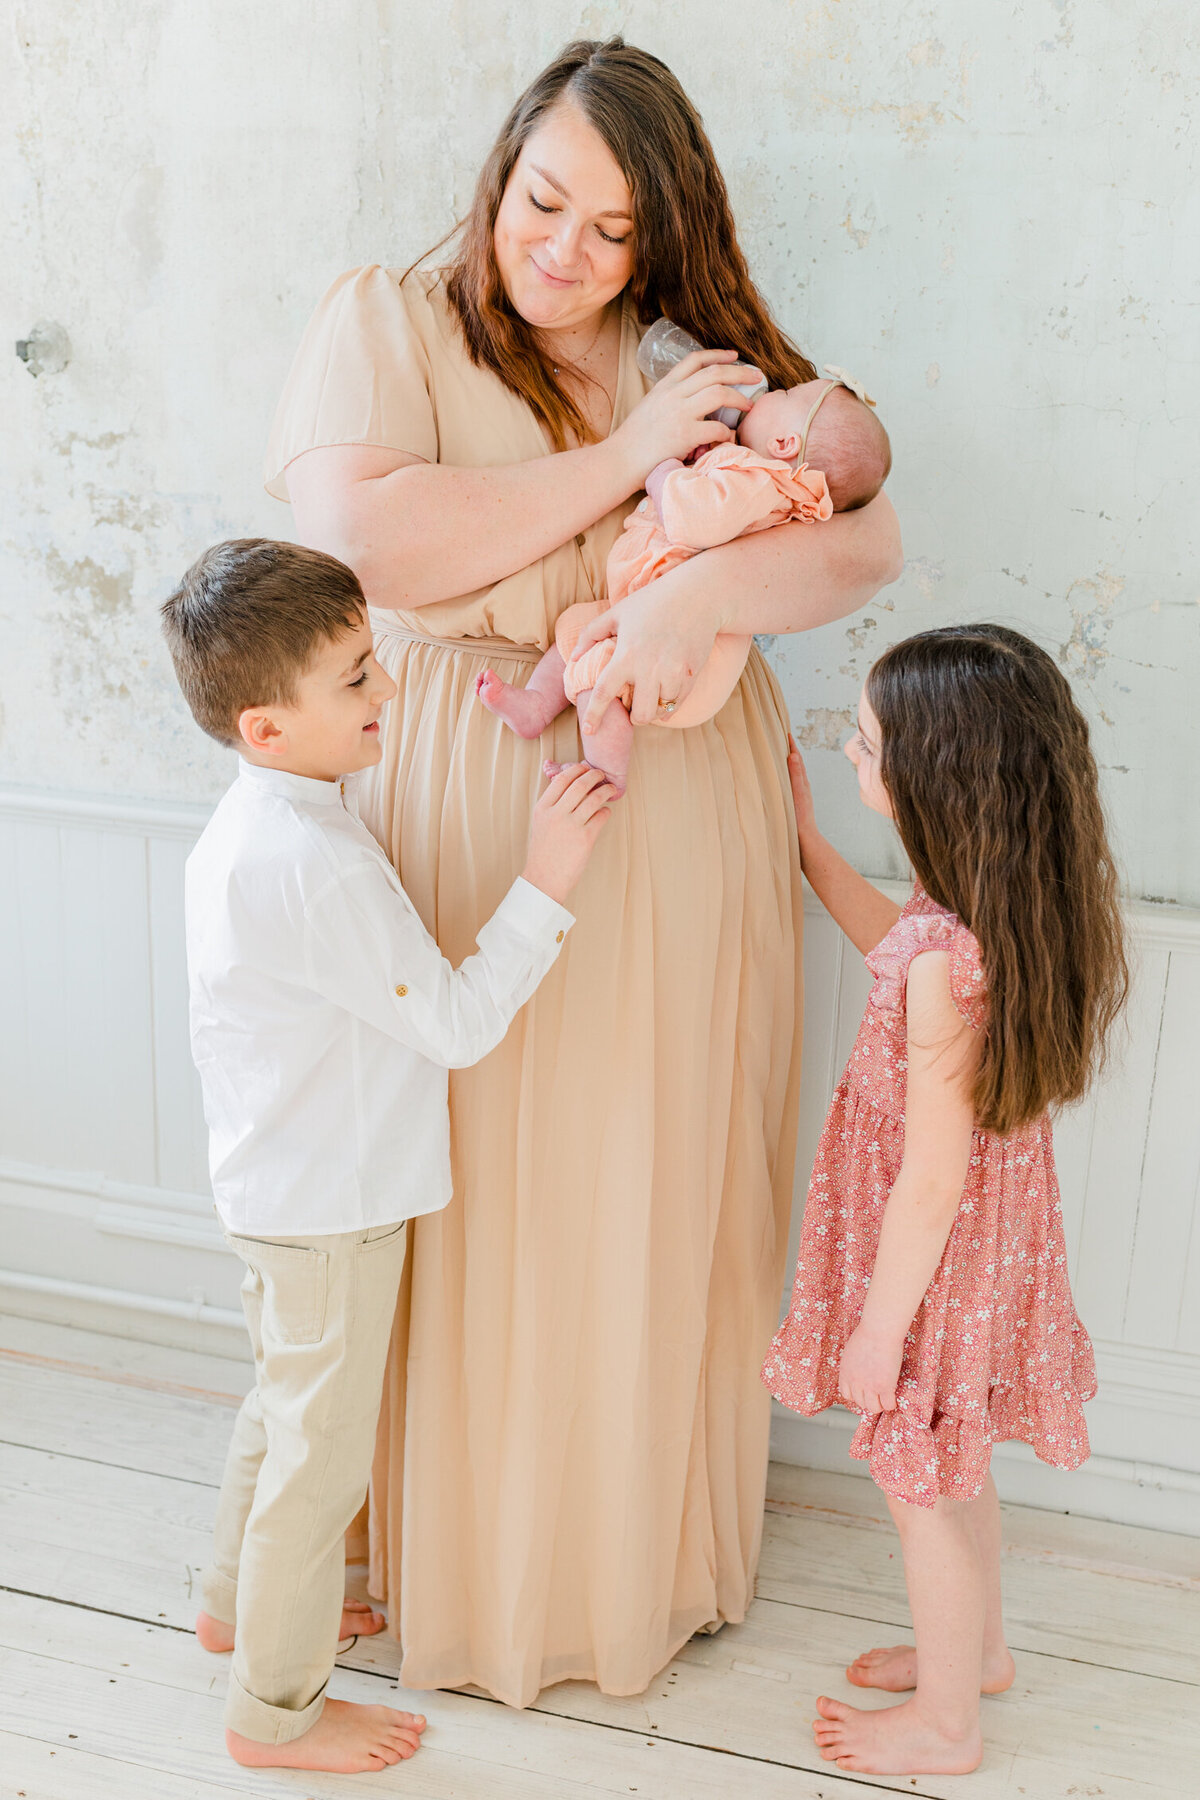 Newborn family session in Massachusetts | Mother is standing and feeding her newborn baby a bottle while brother plays with the baby's feet and sister looks on